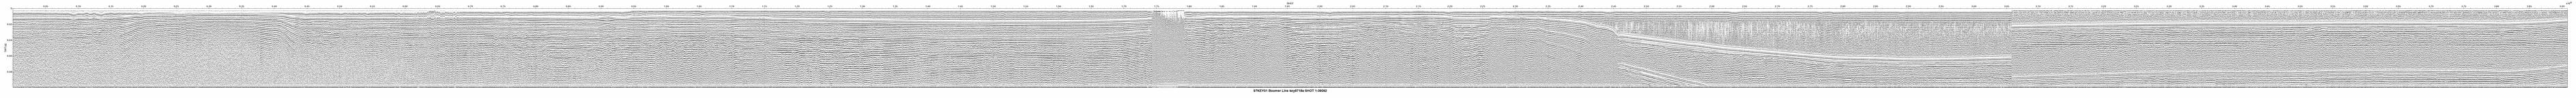 Thumbnail GIF image of the seismic trackline key9718a, with a hotlink to the more detailed, larger JPG image.